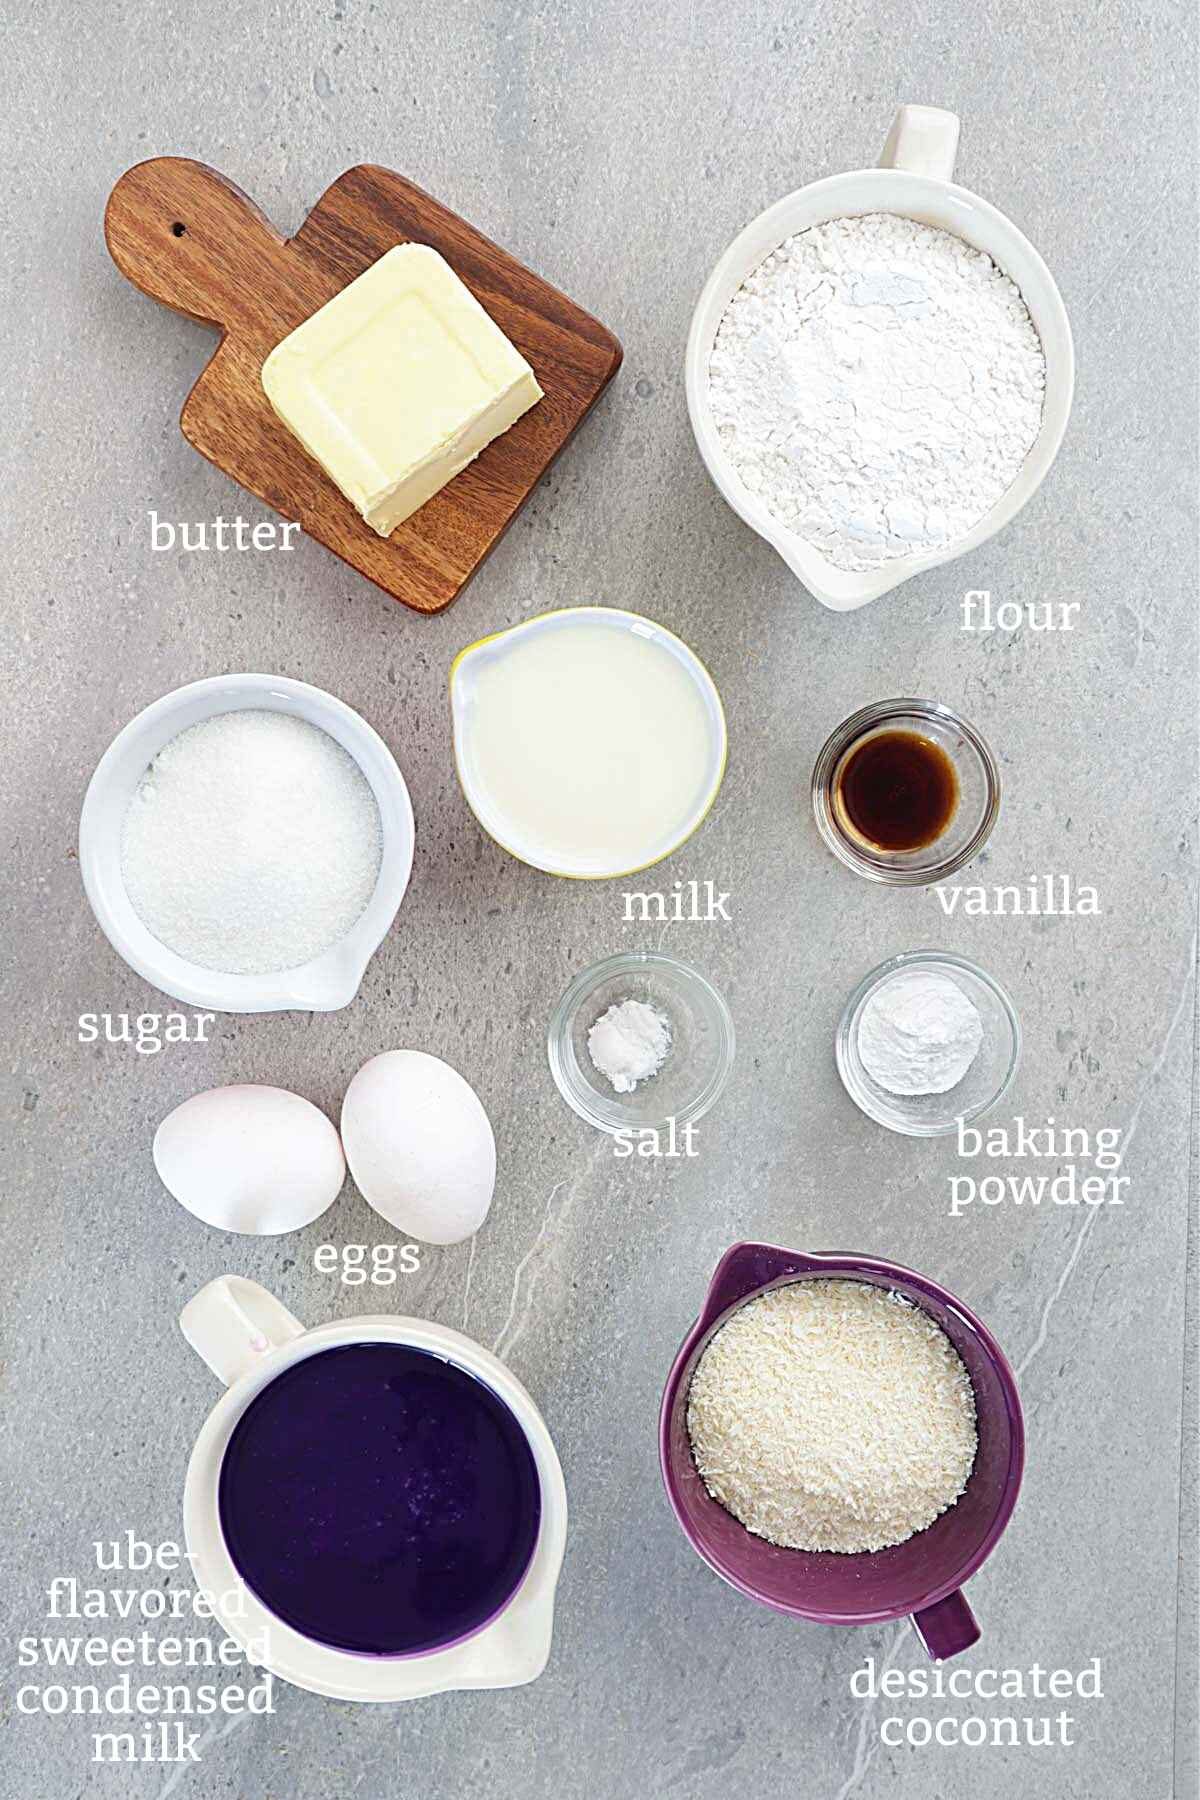 Ingredients for making ube bars.